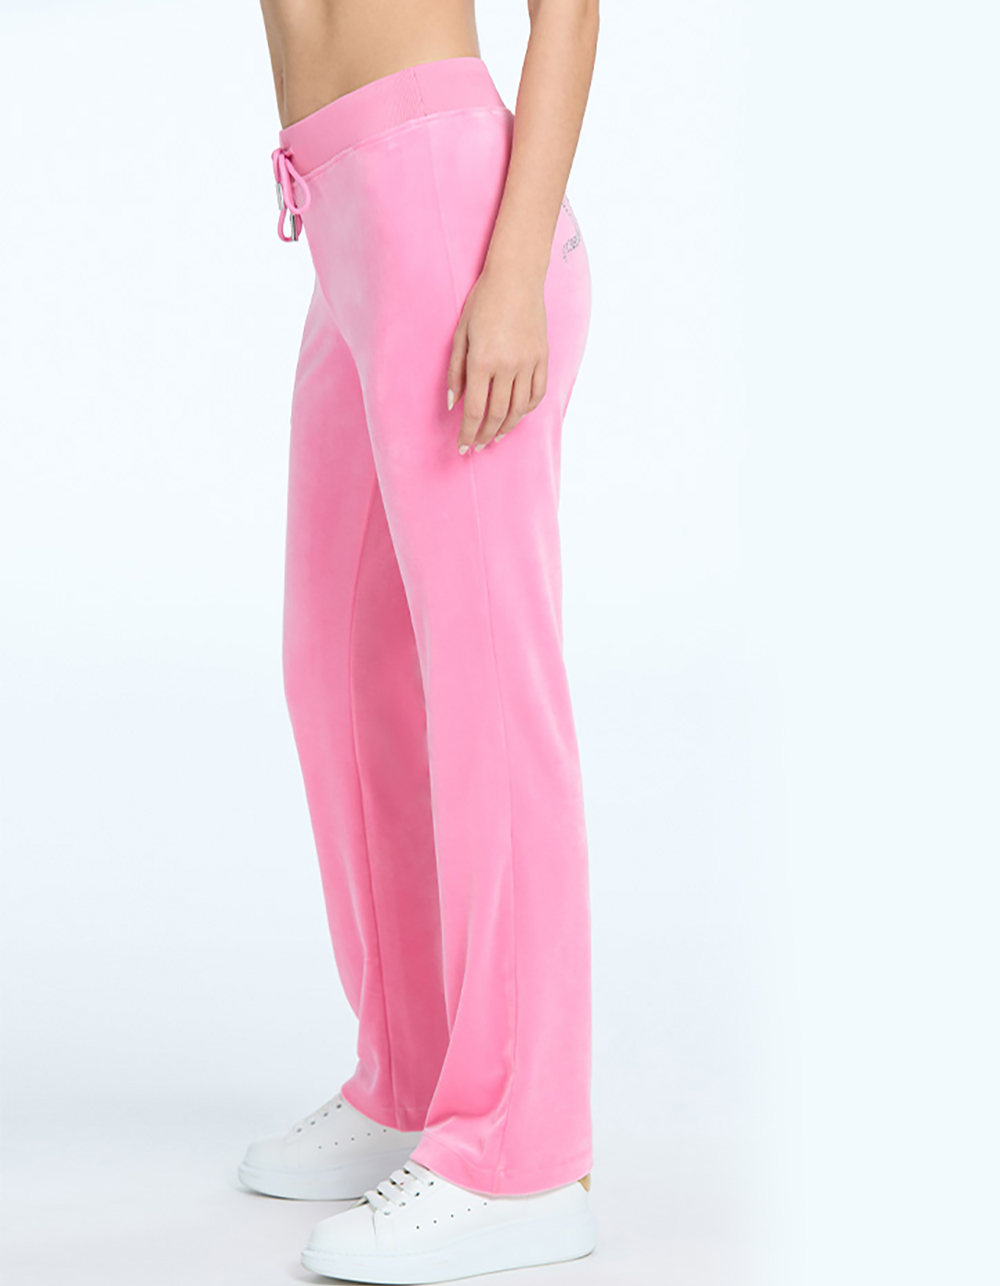 Juicy Couture Pink Athletic Pants for Women